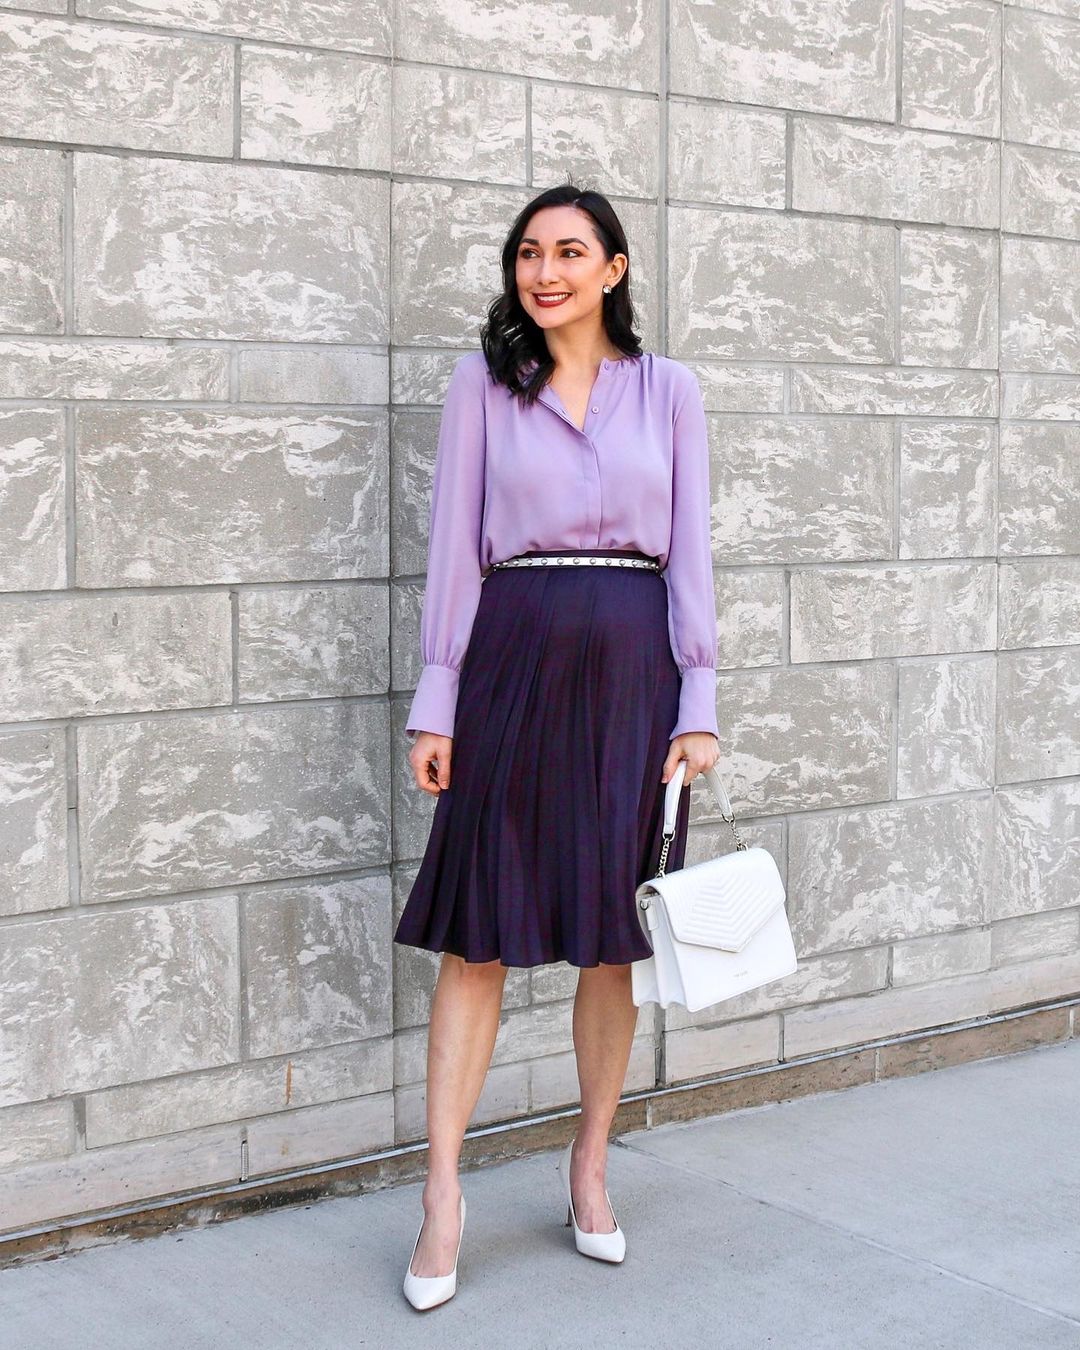 How to Style Purple Skirt? 25 Outfit Ideas